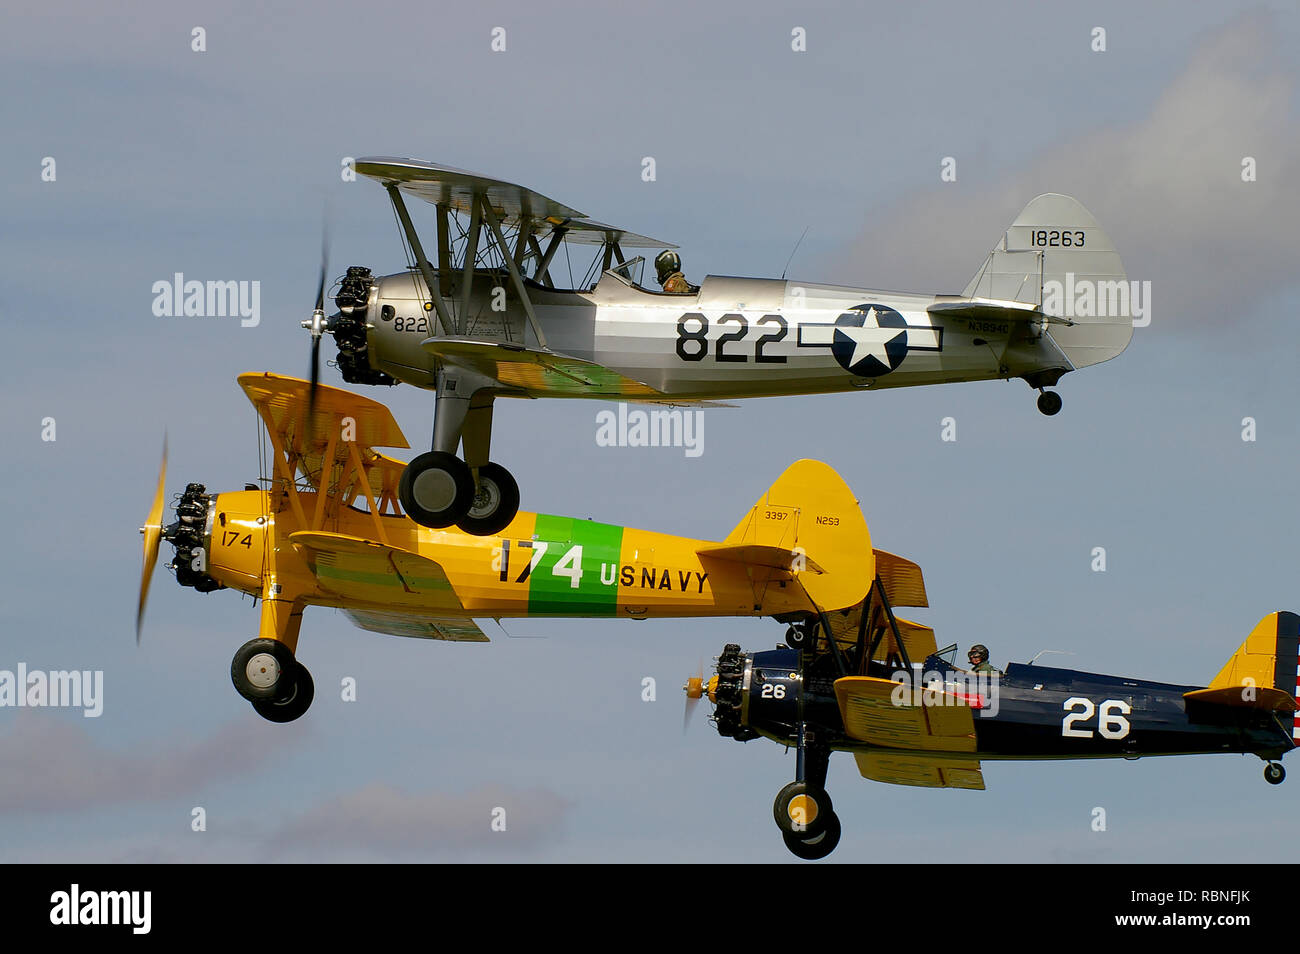 Three Boeing Stearman, Boeing PT-17 Kaydet biplanes flying in formation. Biplane training planes. Second World War biplanes. Flying at an air show Stock Photo